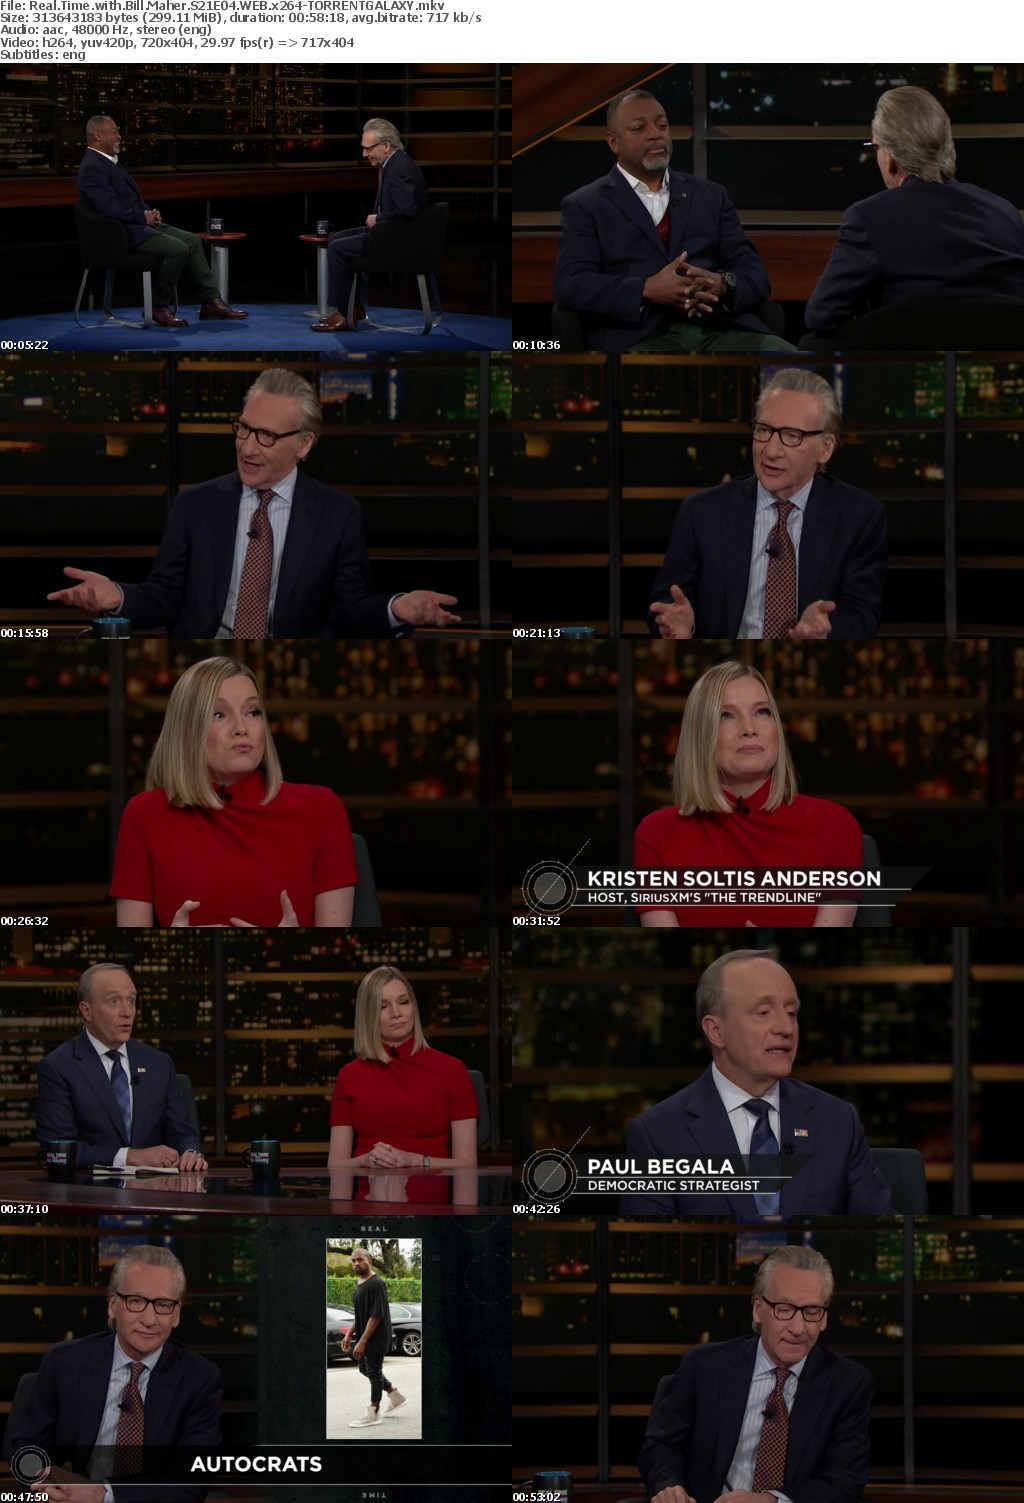 Real Time with Bill Maher S21E04 WEB x264-GALAXY